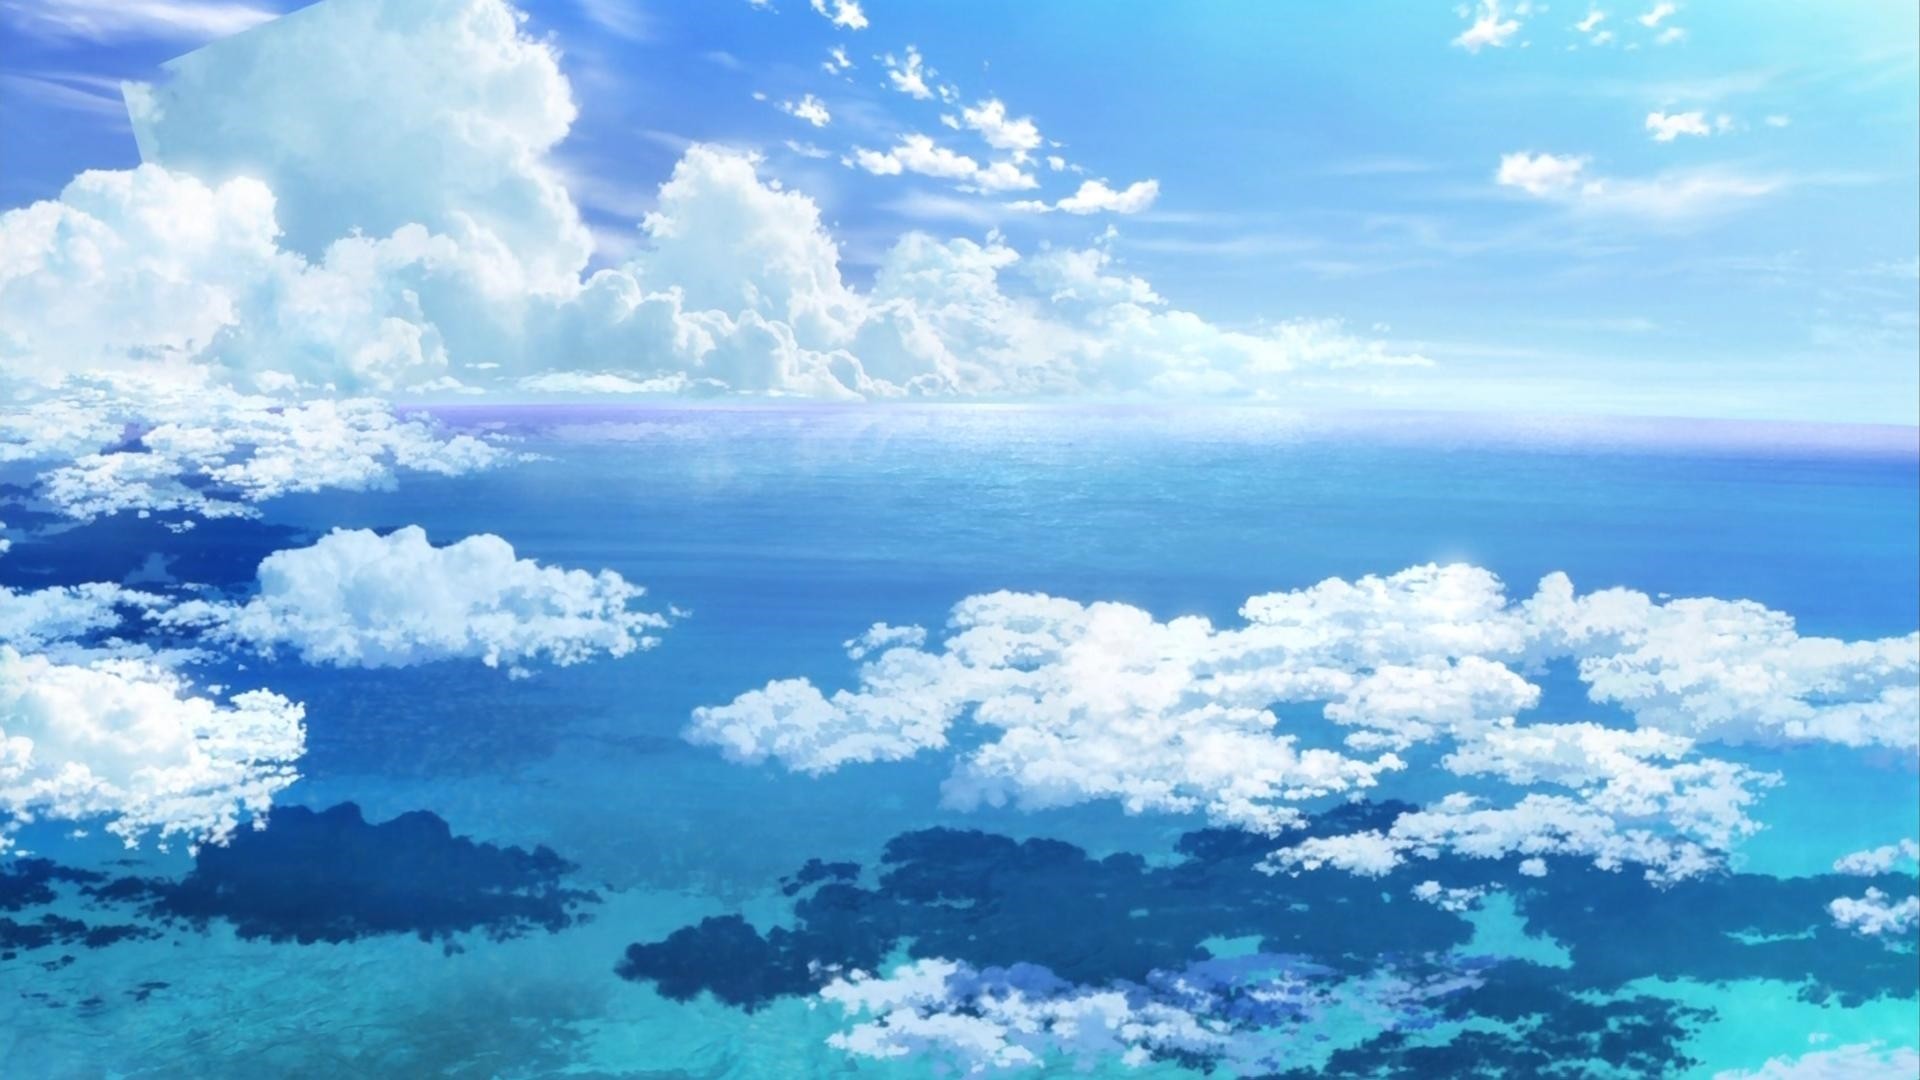 Anime Clouds Wallpaper image hd